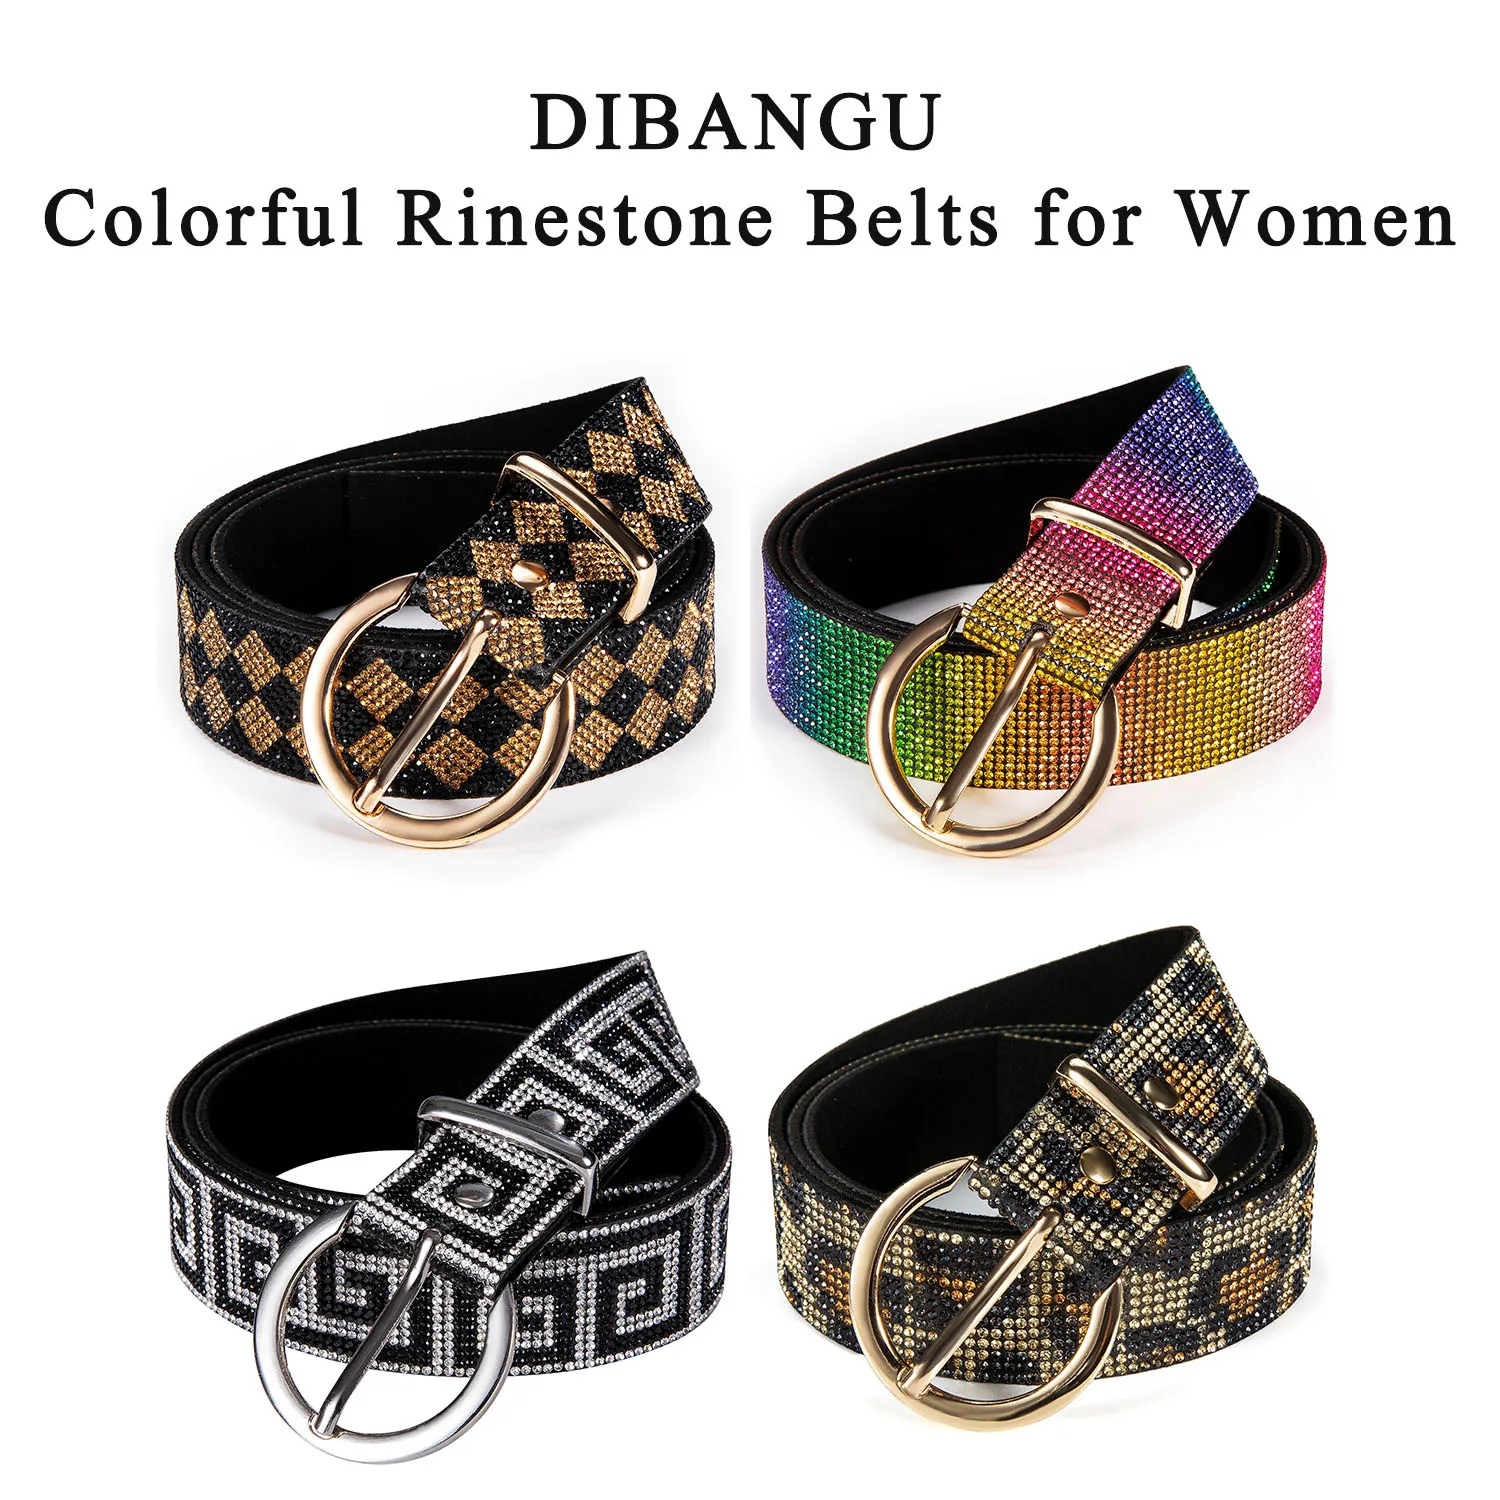 Rhinestone Belts for Women Designer Stylish Casual Canvas Belt with Holes Sliver Pin Buckle Diamond Shinning Jeans Waistband